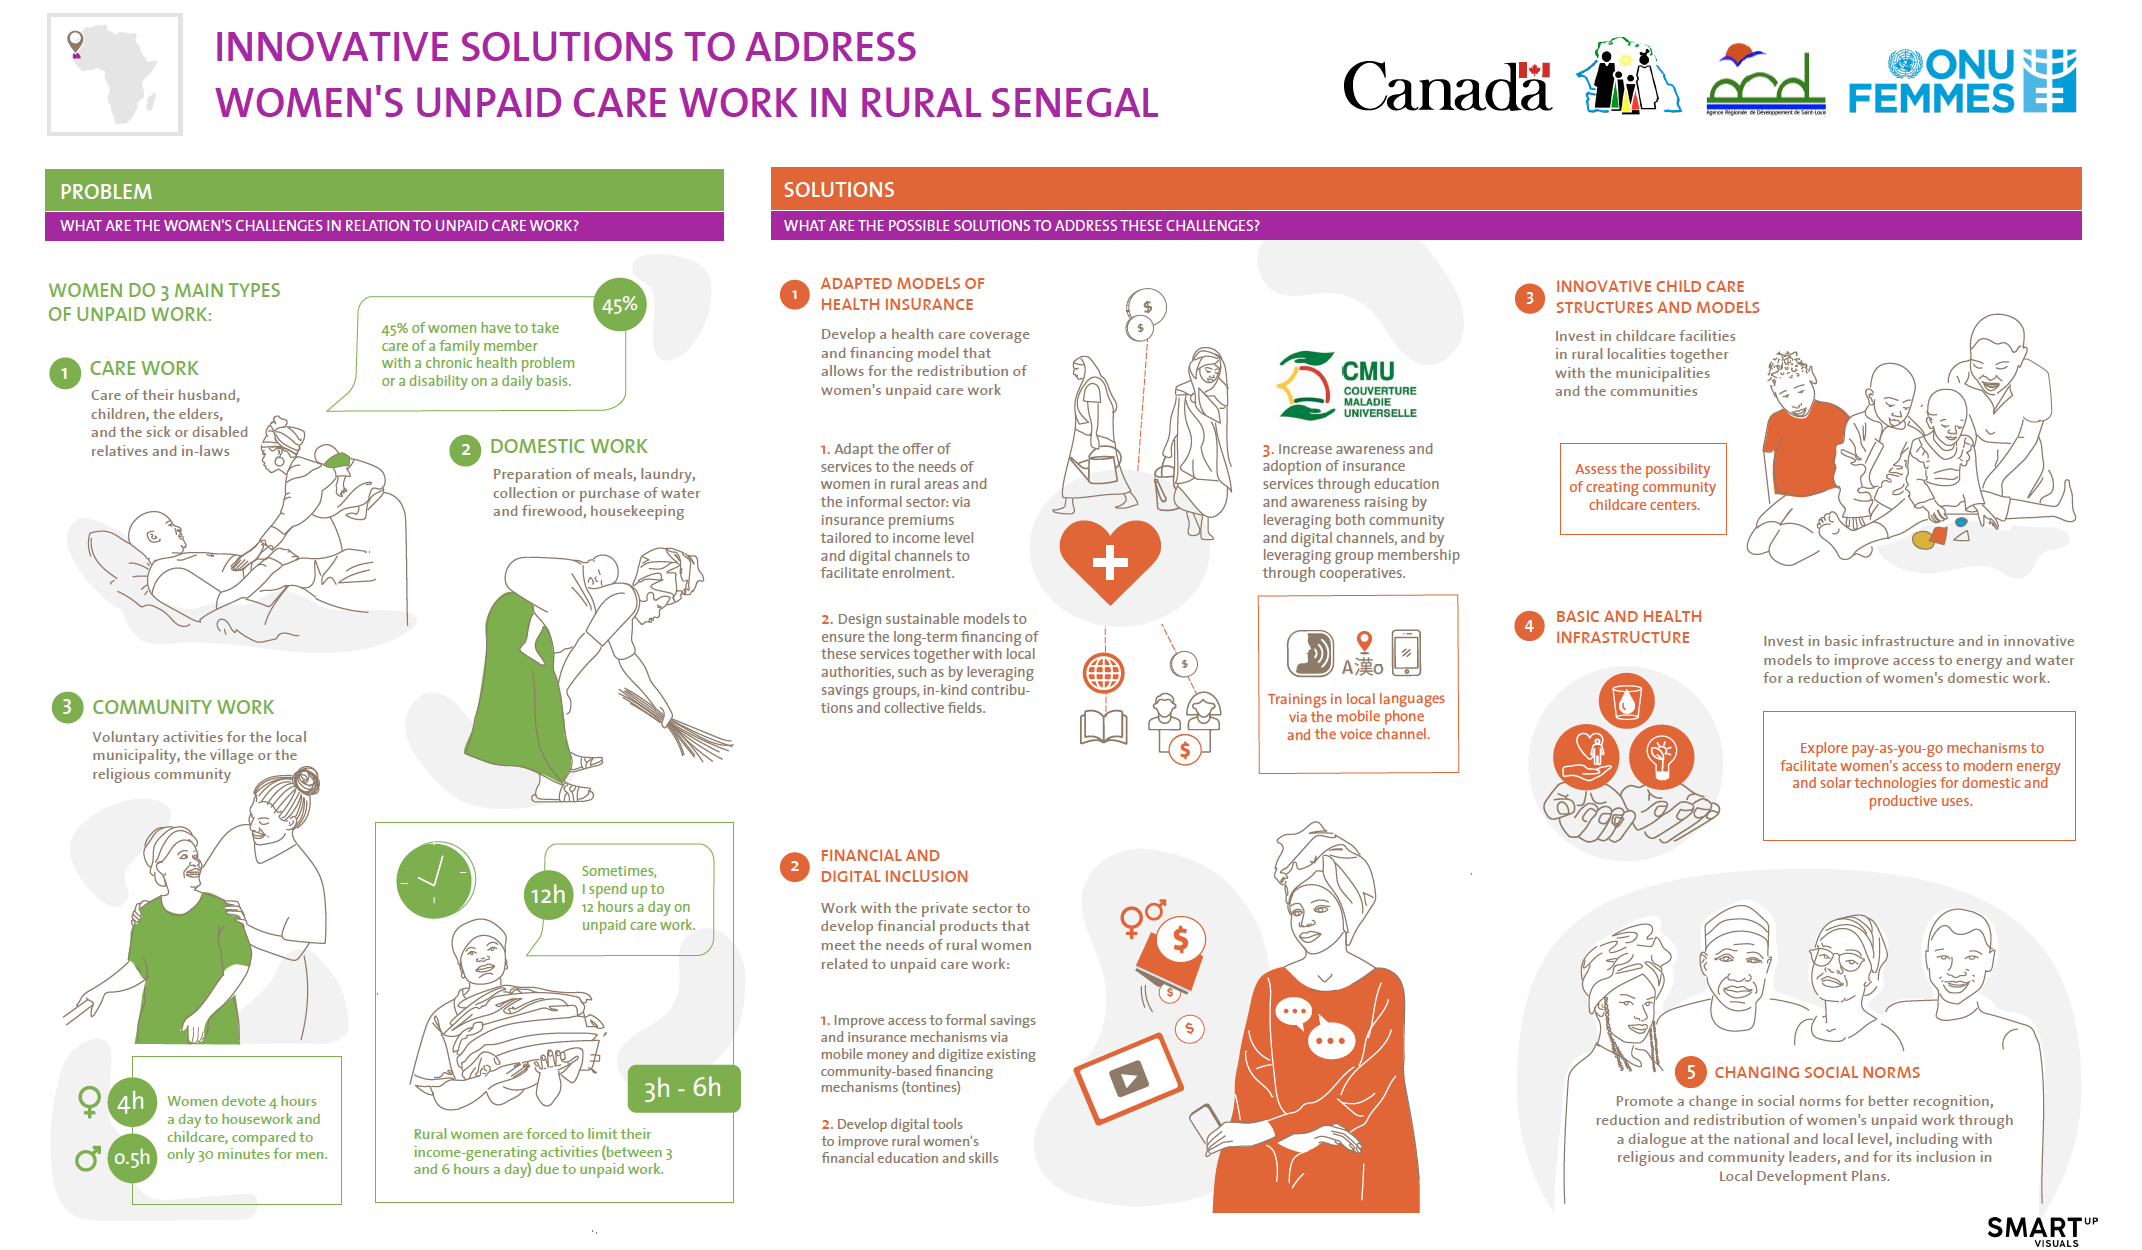 INNOVATIVE SOLUTIONS FOR RURAL WOMEN'S UNPAID CARE WORK IN SENEGAL